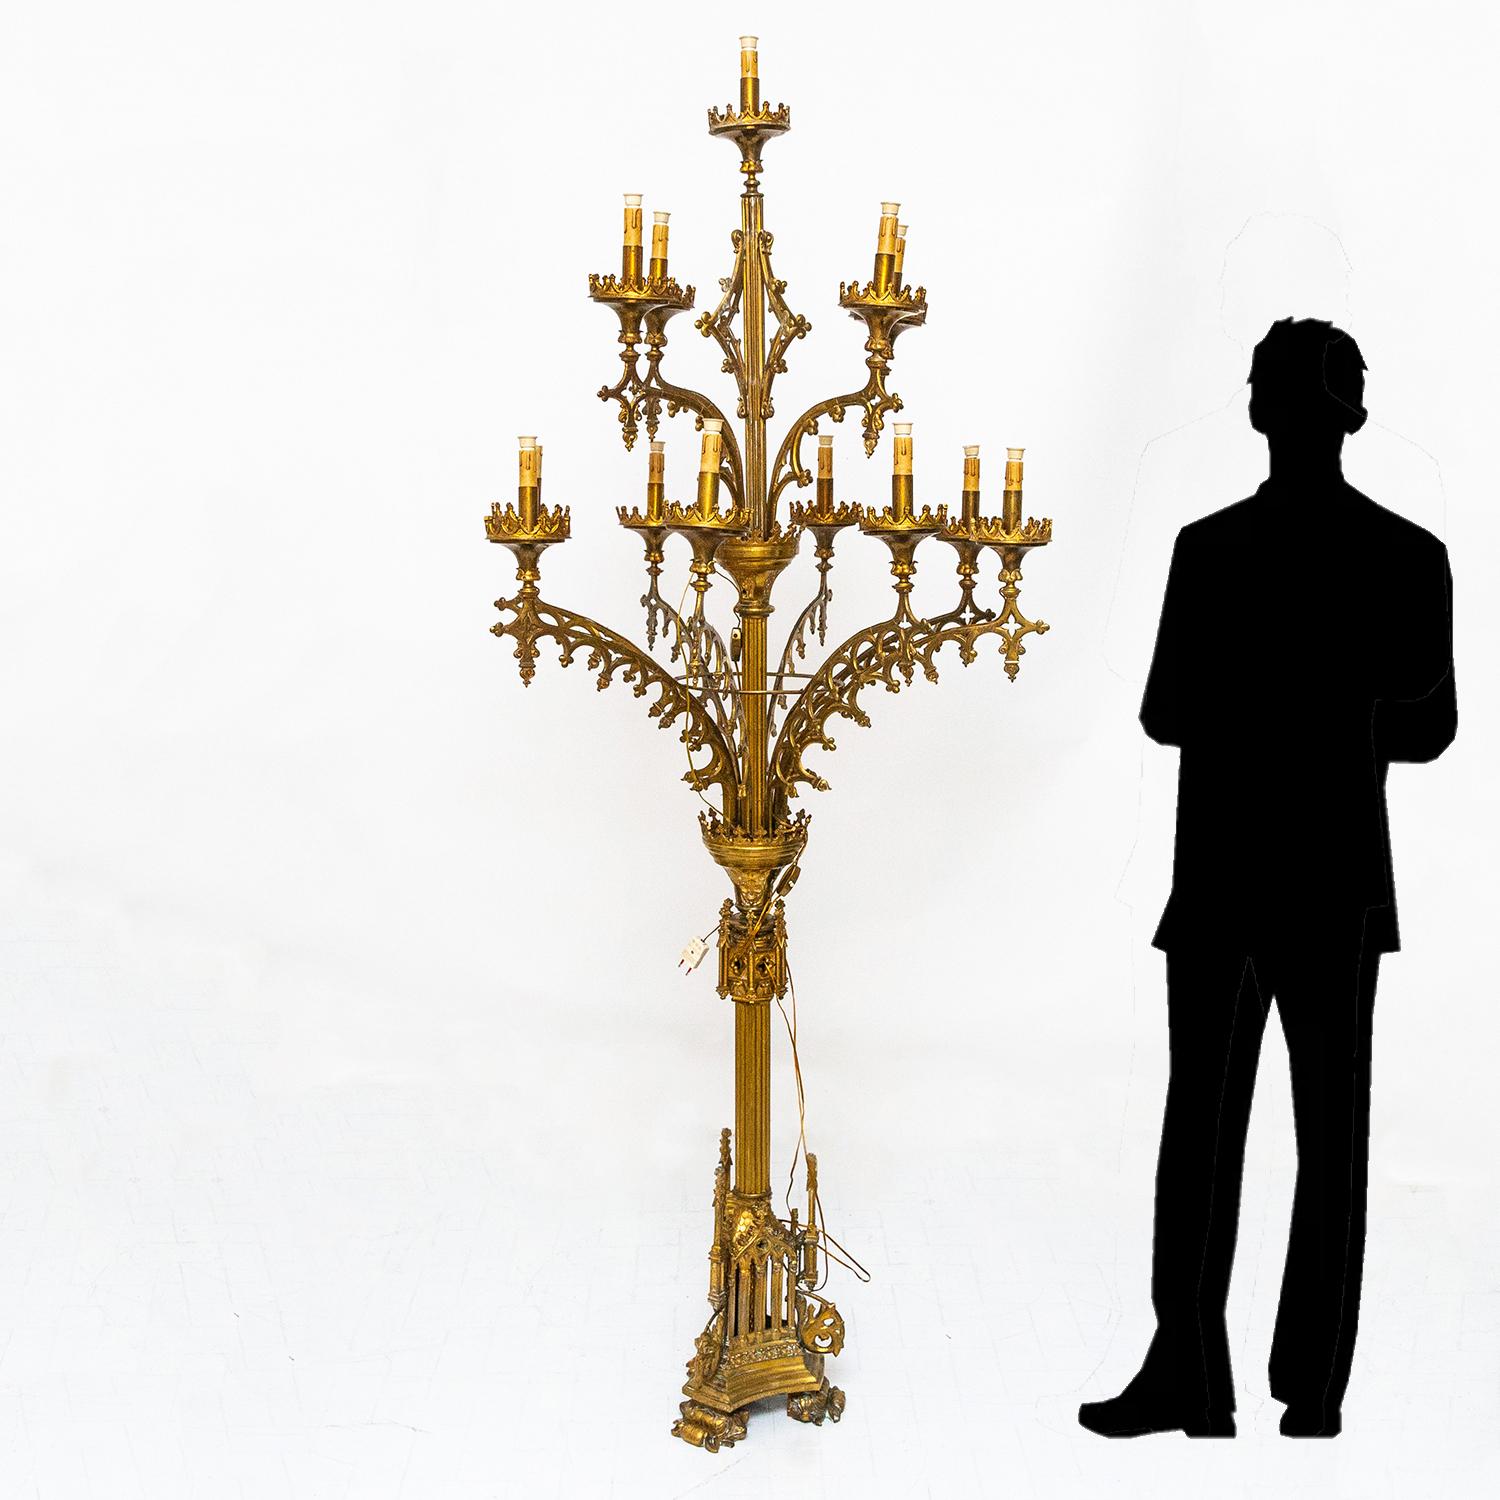 Large gilded bronze candlestick, dated 24 May 1908. On the base bears an inscription commemorating the beatification of Maddalena Sofia Barat (Joigny, 12 December 1779 - Paris, 25 May 1865) was a French religious, founder of the Society of the